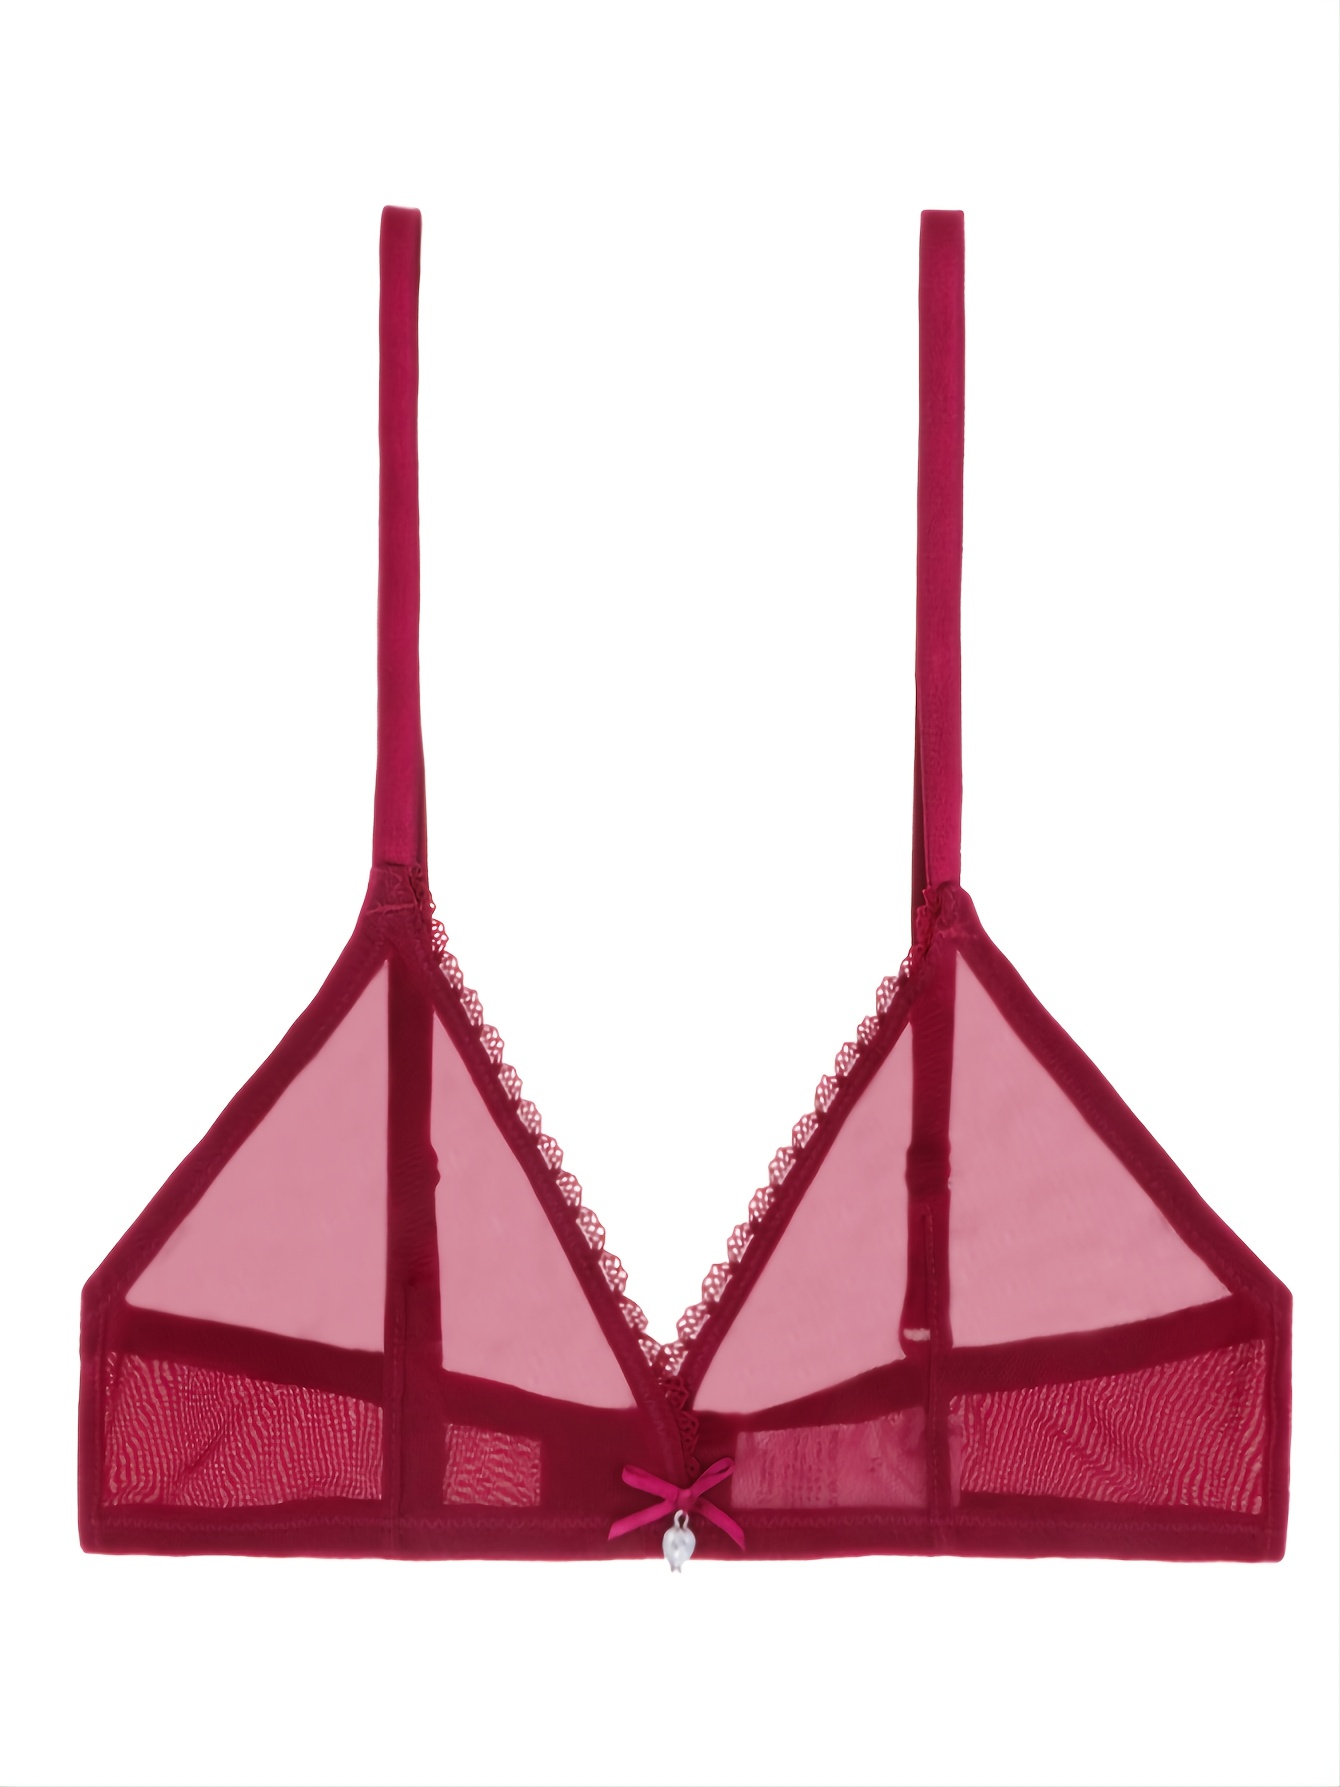 Unlined Transparent Bras - Search Shopping